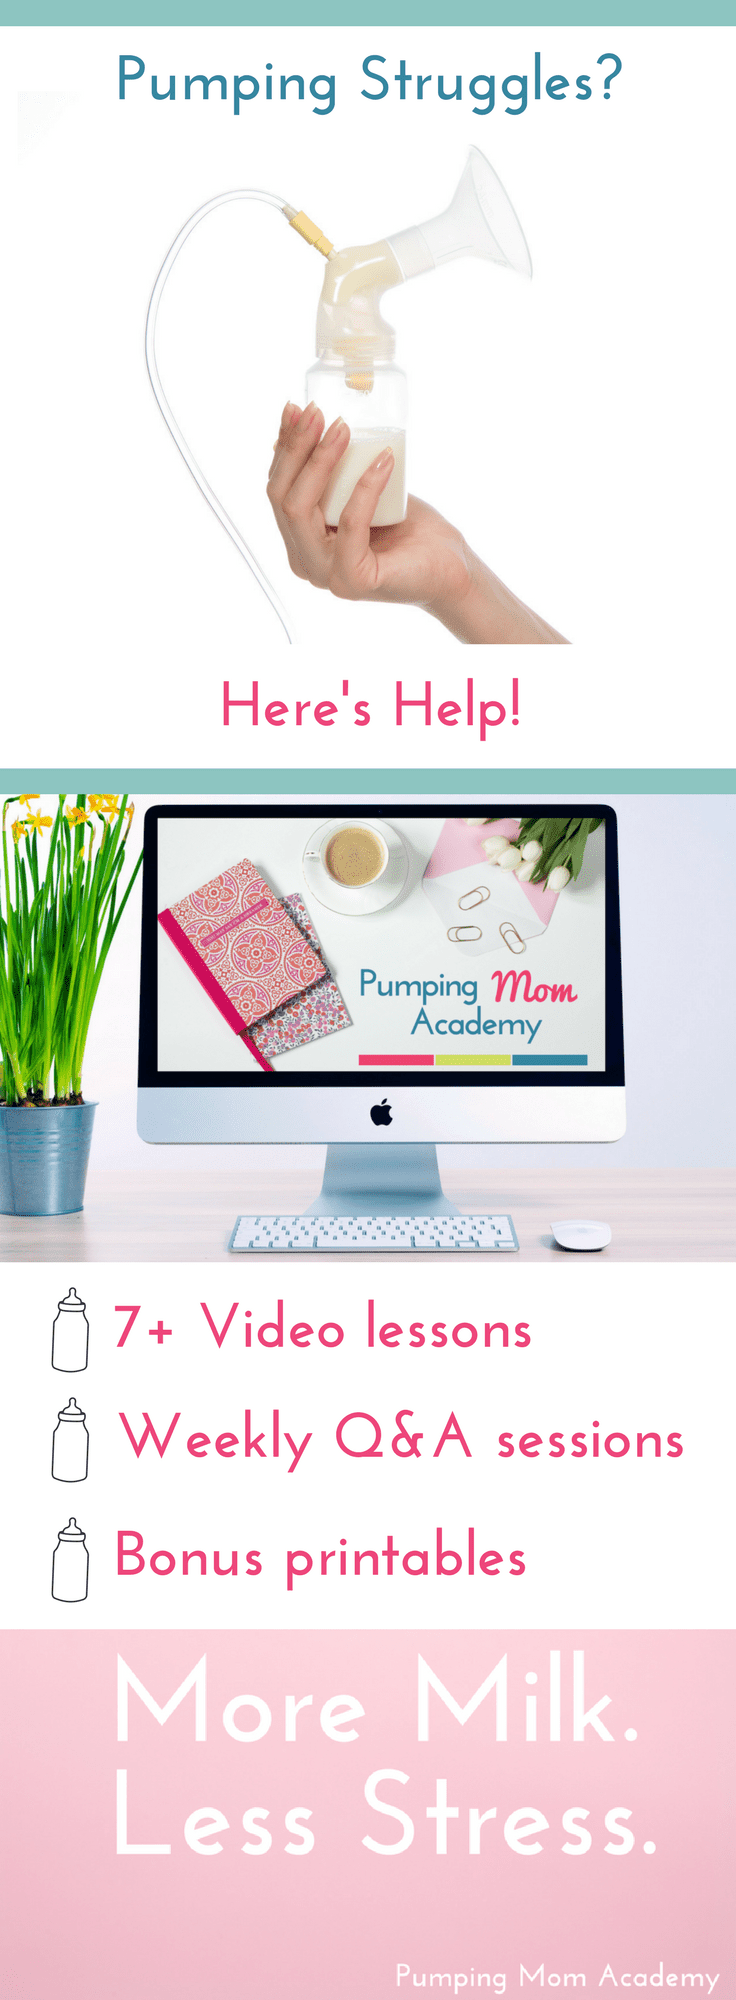 Are you a new mom struggling to pump milk for your baby? Pumping Mom Academy has got you covered! You'll learn how to not dread pumping, how to create a pumping schedule, how to increase low supply, how to get more milk out when you pump, and SO much more. Click to learn more! #breastfeeding #newborn #pumping #exclusivelypumping #imakemilk #breastfeeding #lowsupply #pumpinghacks #pumpingexclusively #pumpingschedule #pumpingatwork